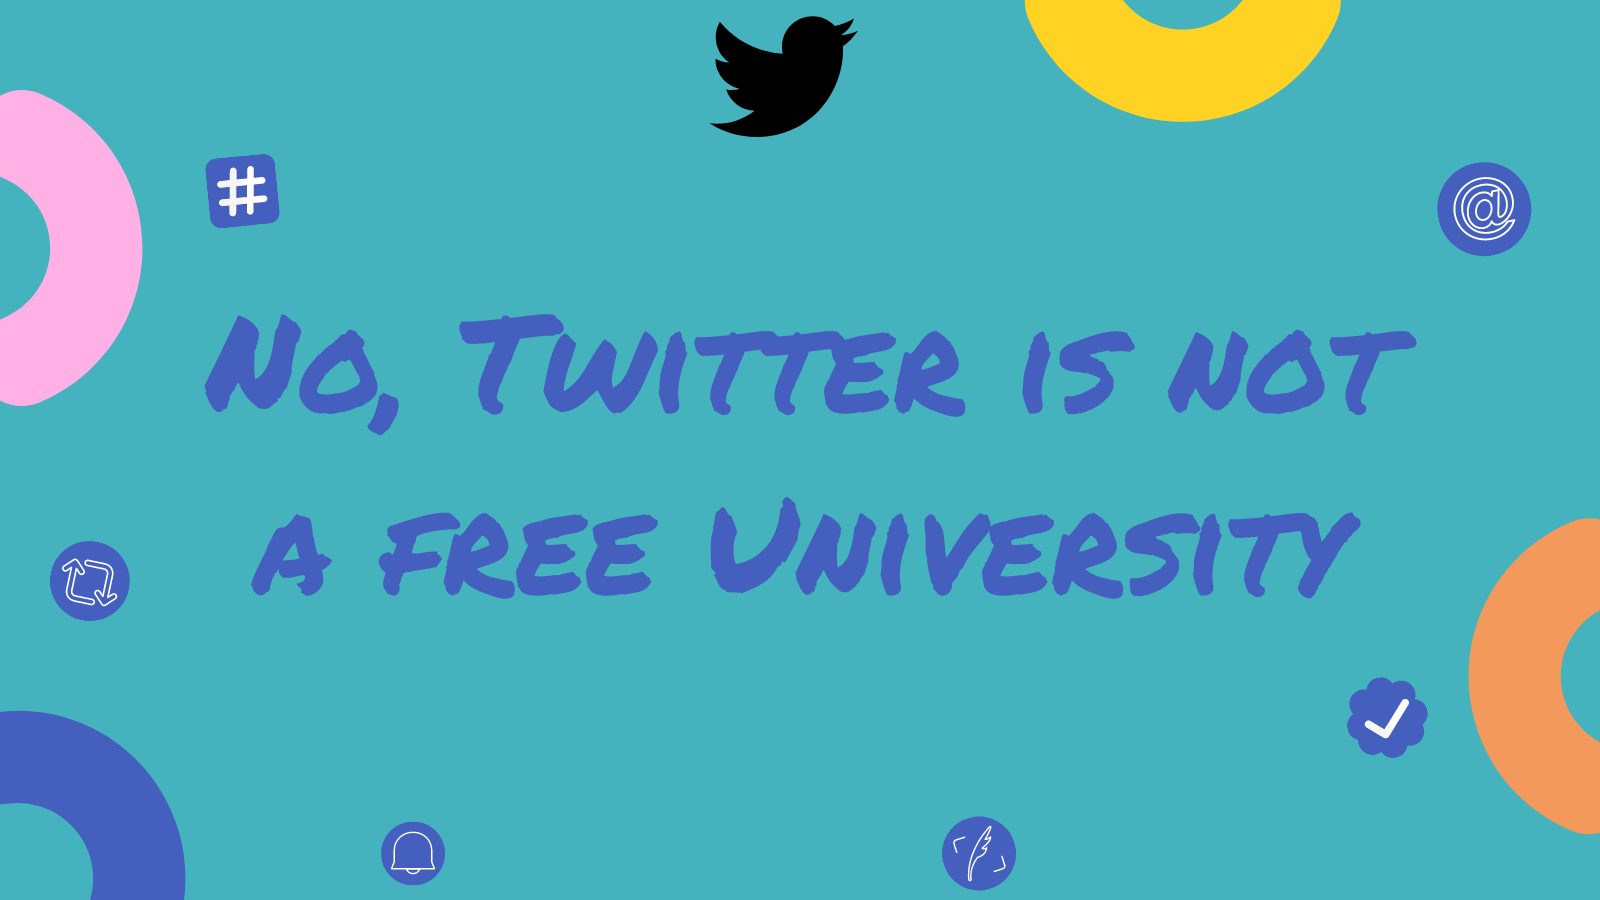 No, Twitter is not a free university 🤚